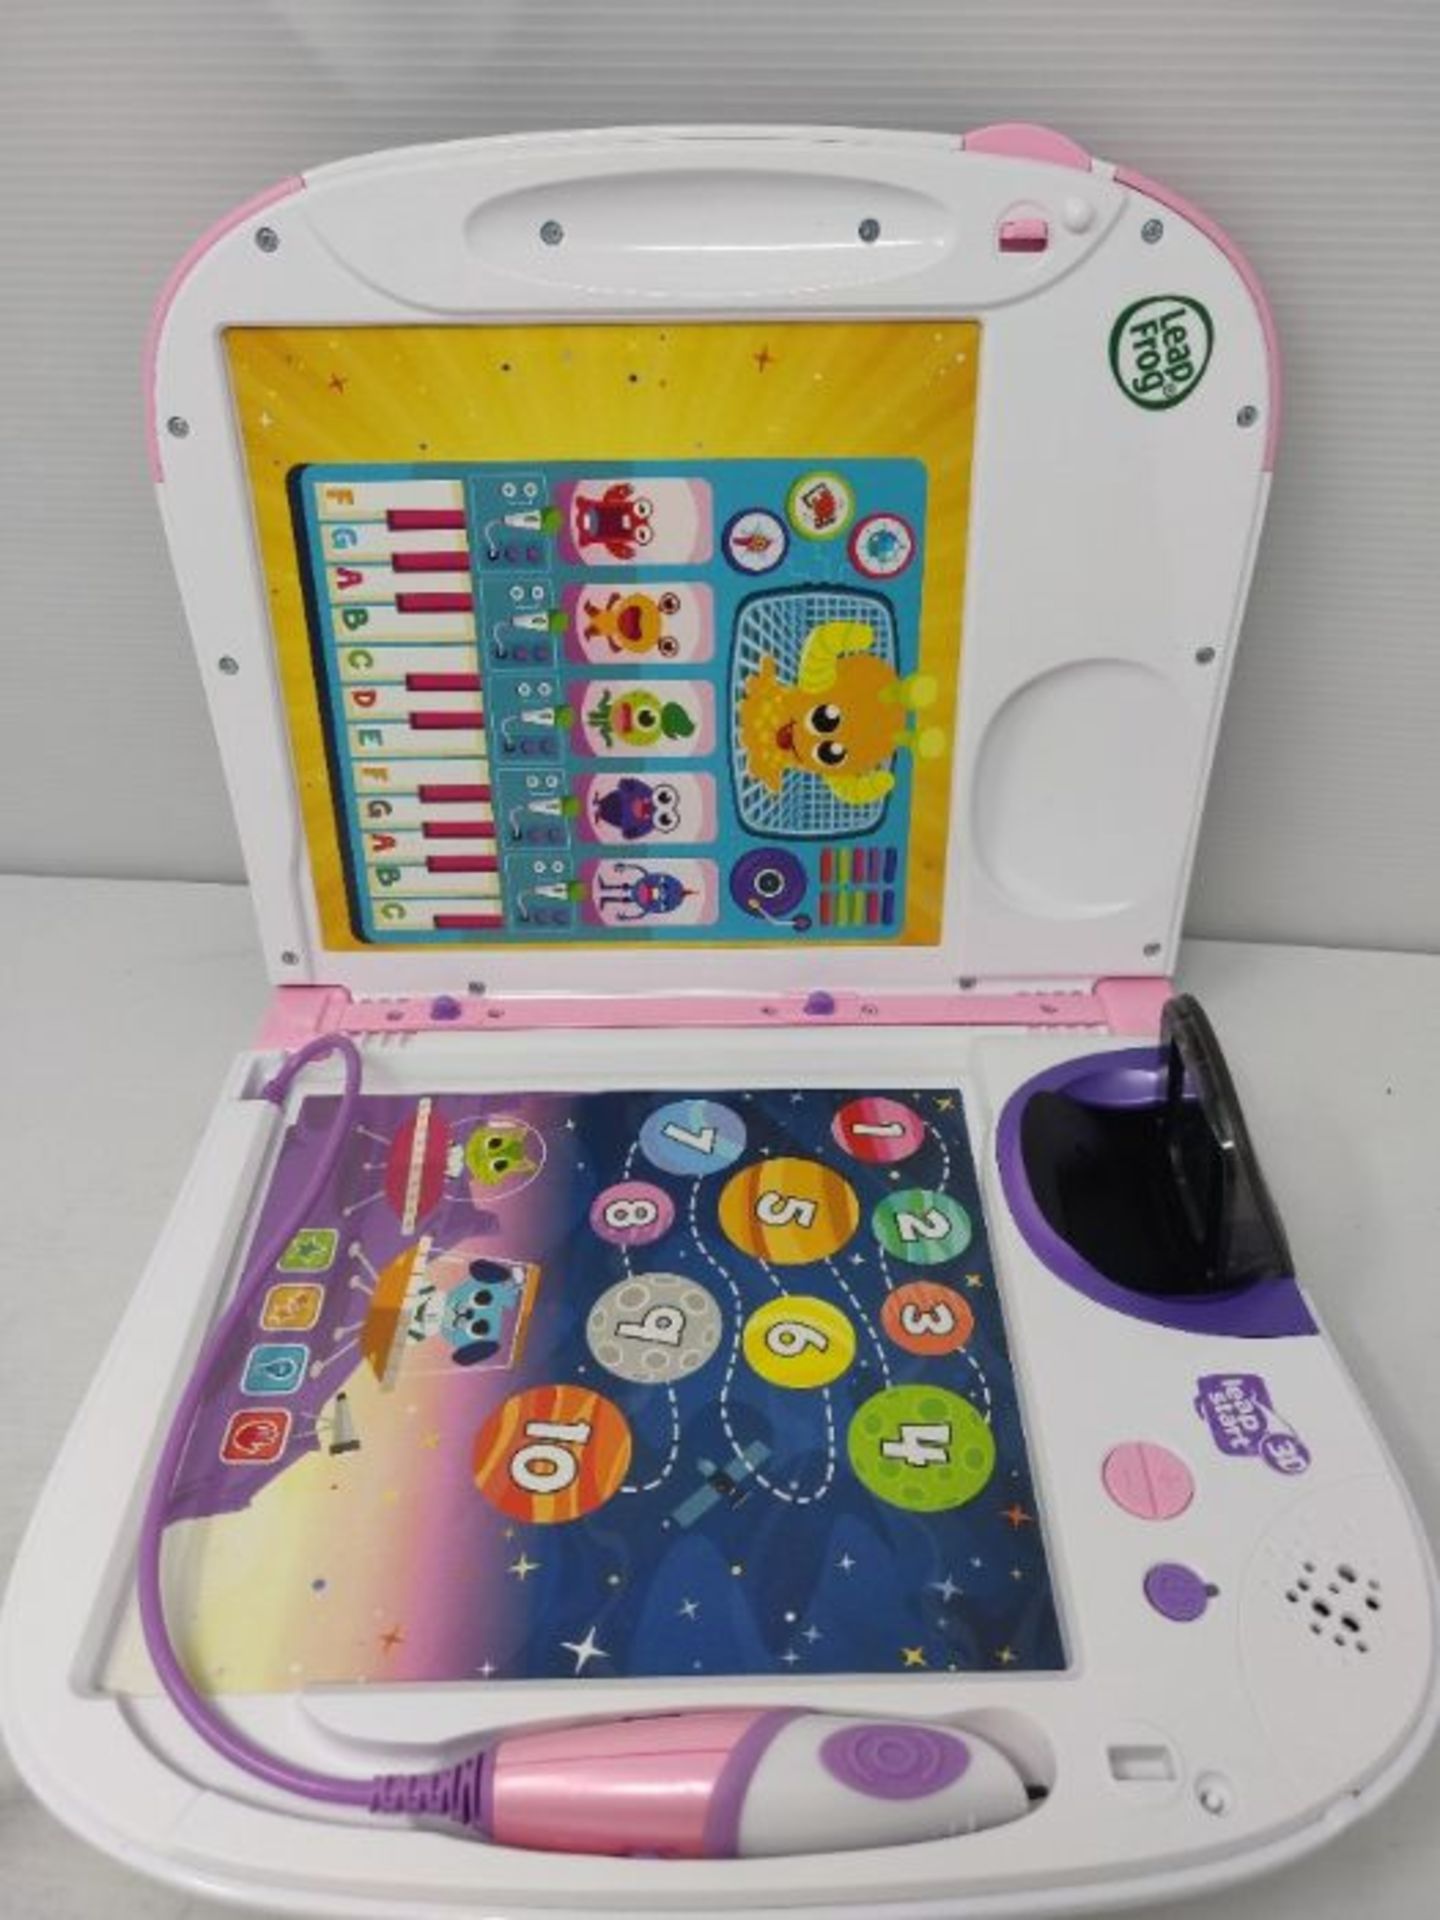 RRP £67.00 LeapFrog 603953 LeapStat Holo Pink Leap Start Learning Toy, One Size - Image 2 of 2